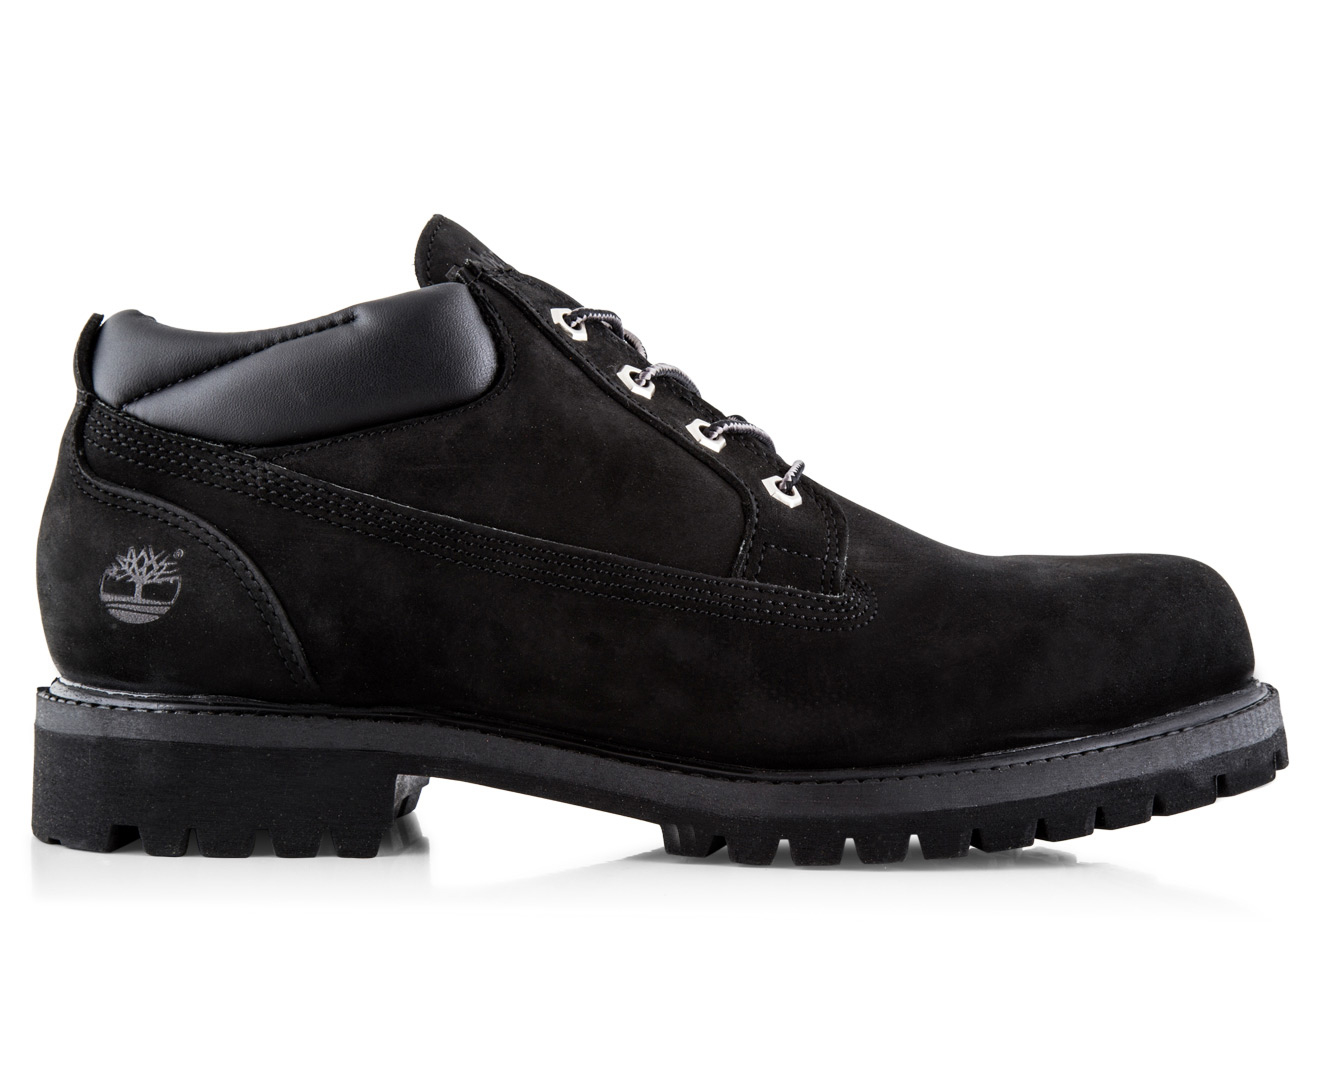 timberland classic oxford waterproof boots